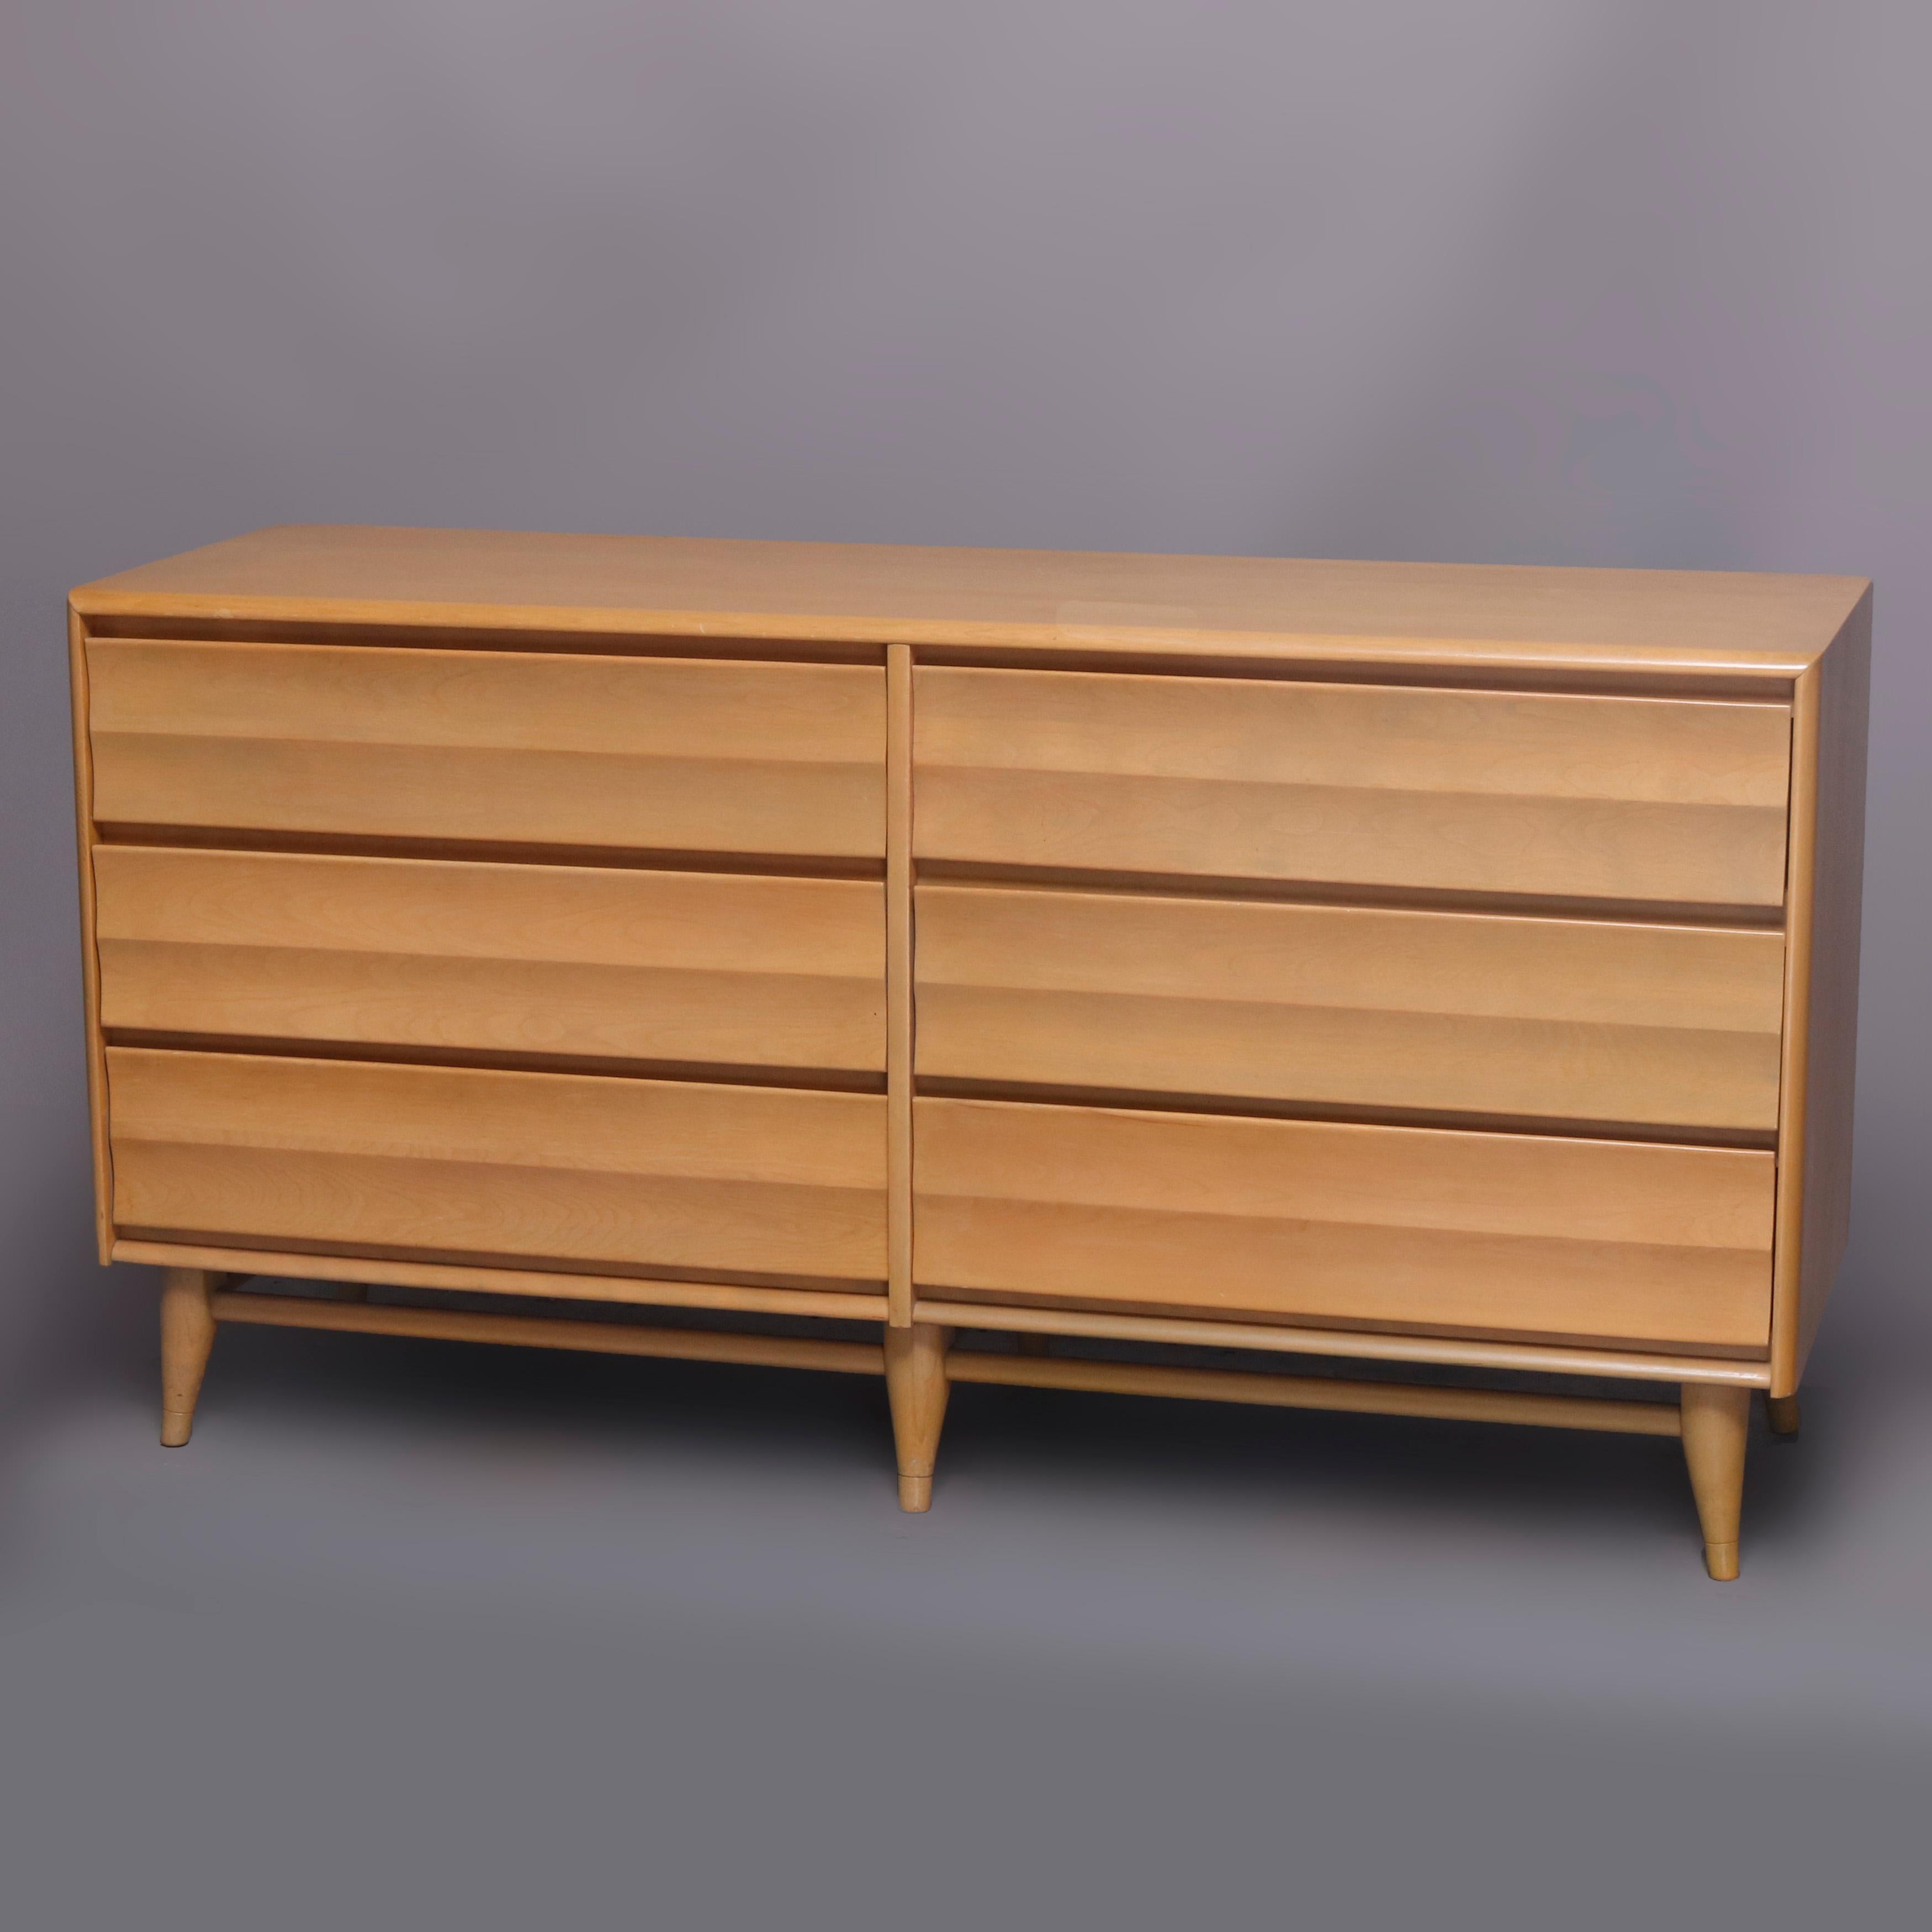 A Mid-Century Modern dresser by Heywood-Wakefield offers birch construction in harmonic pattern with 6-drawer lowboy and mirror in platinum finish, maker mark in drawer as photographed, mid-20th century

Measures: 66.75